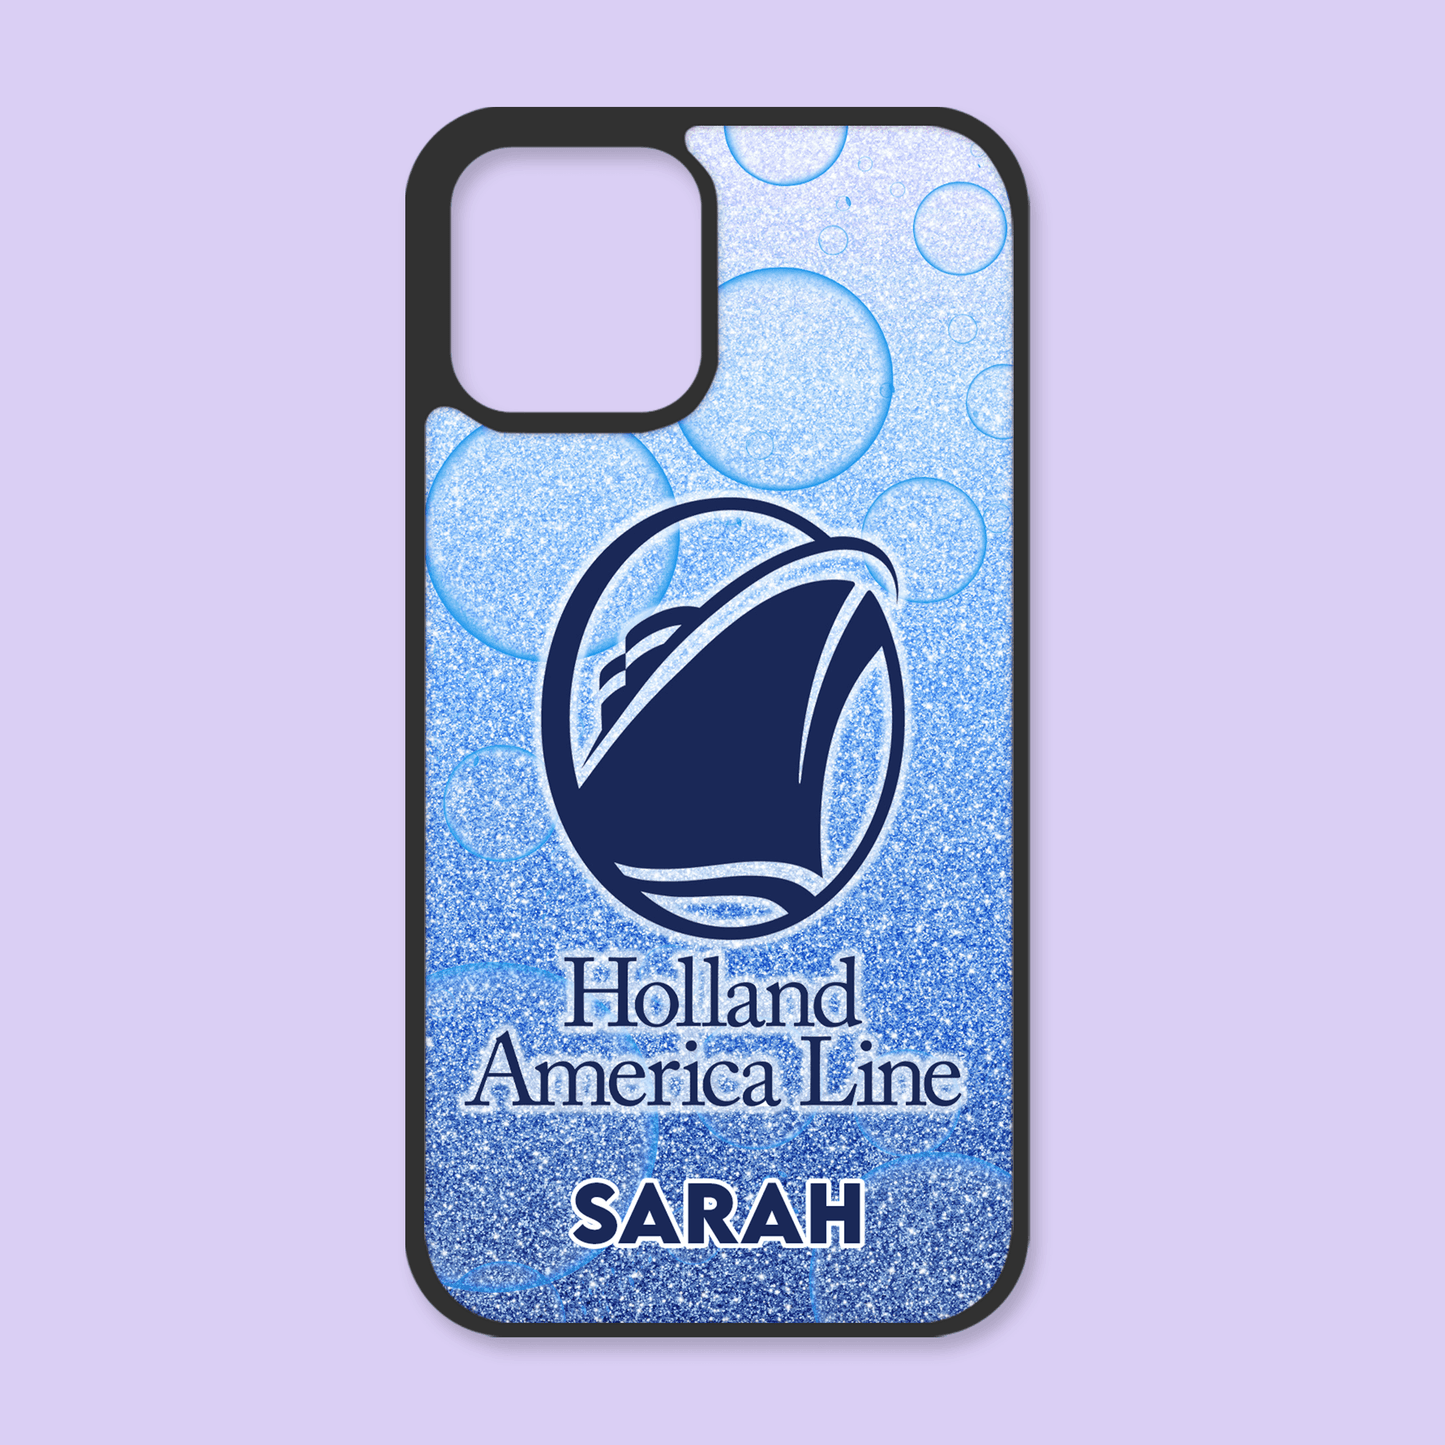 Holland America Cruise Personalized Phone Case - Two Crafty Gays